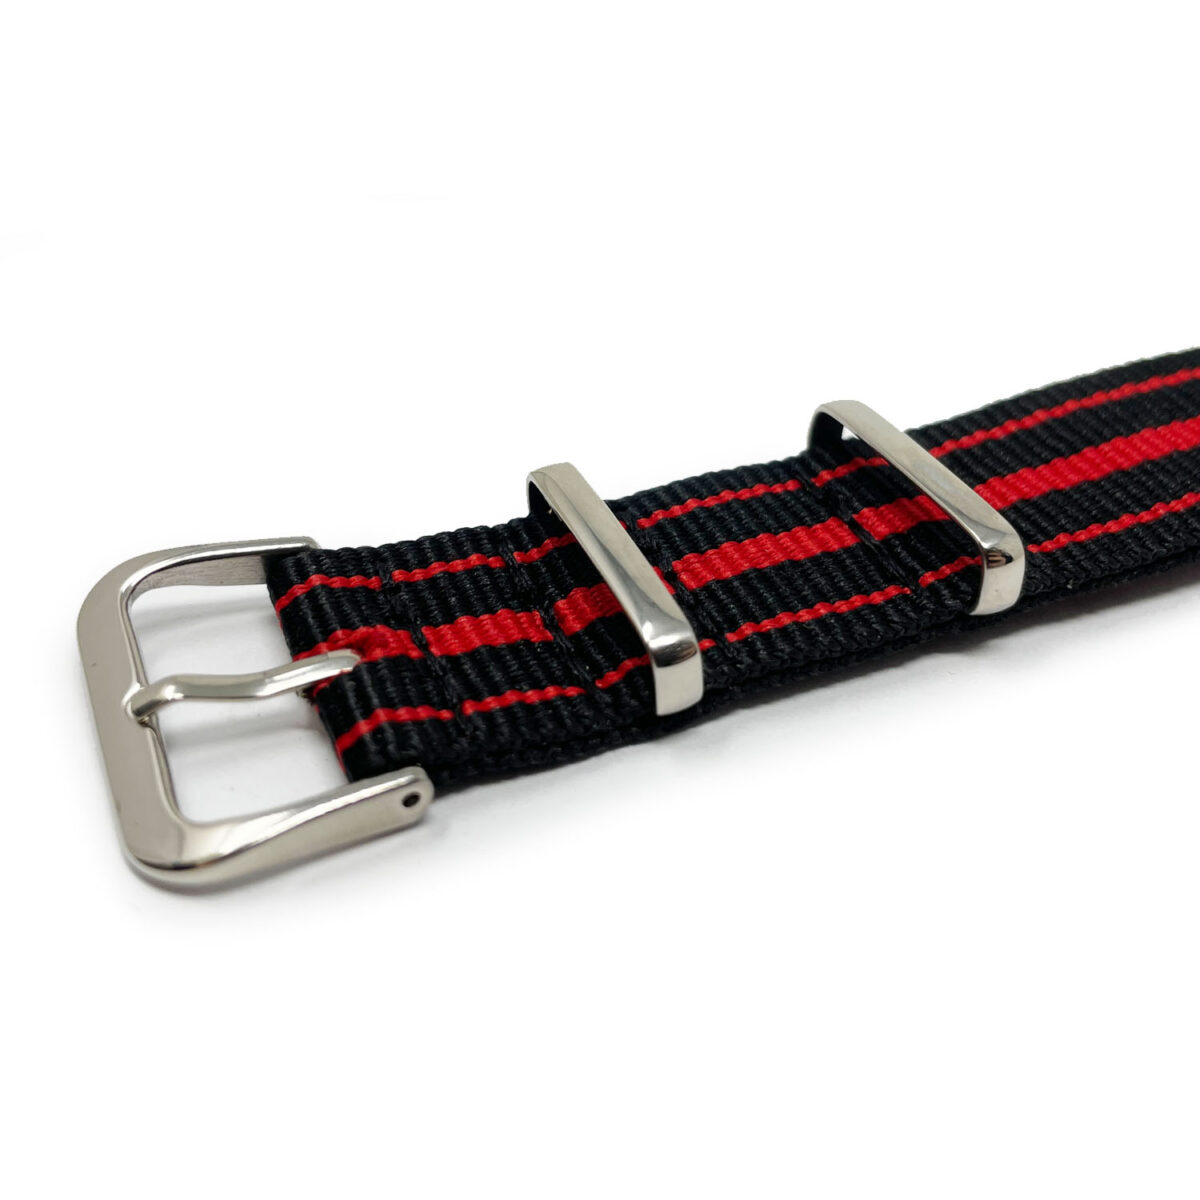 S37037 red and black strap 2